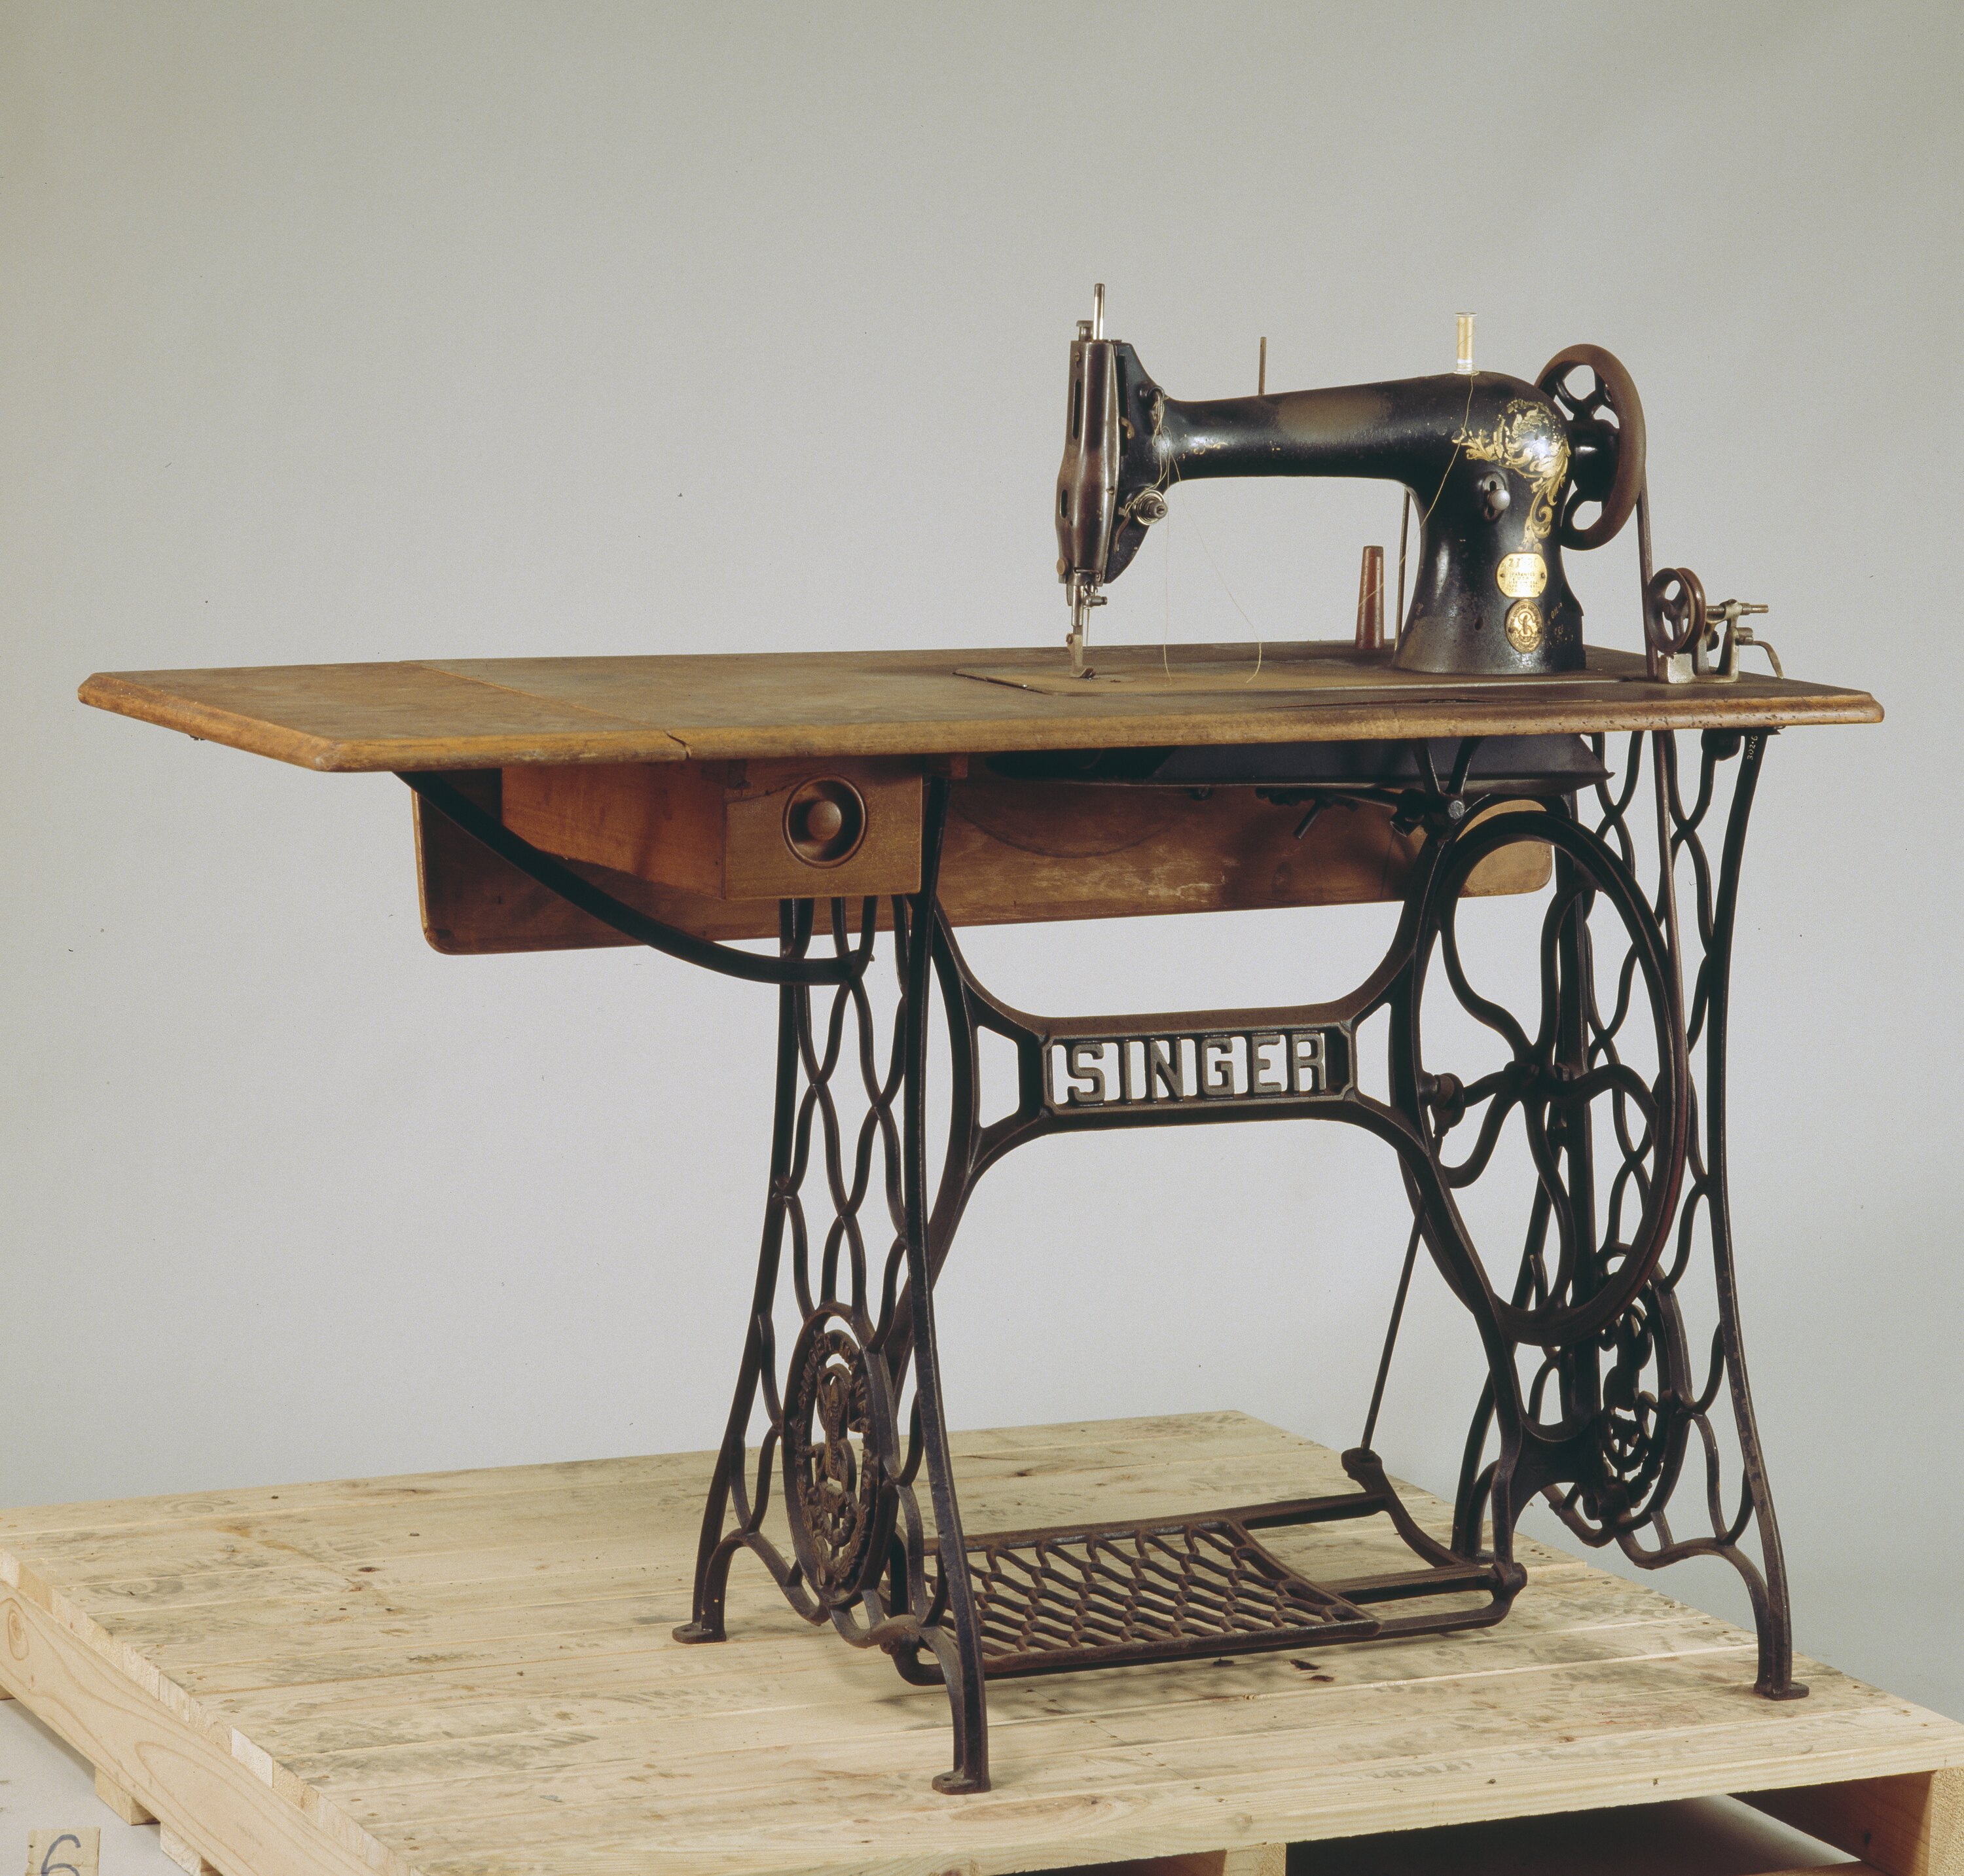 Why I now own this Singer Treadle Sewing Machine – Almost Off Grid